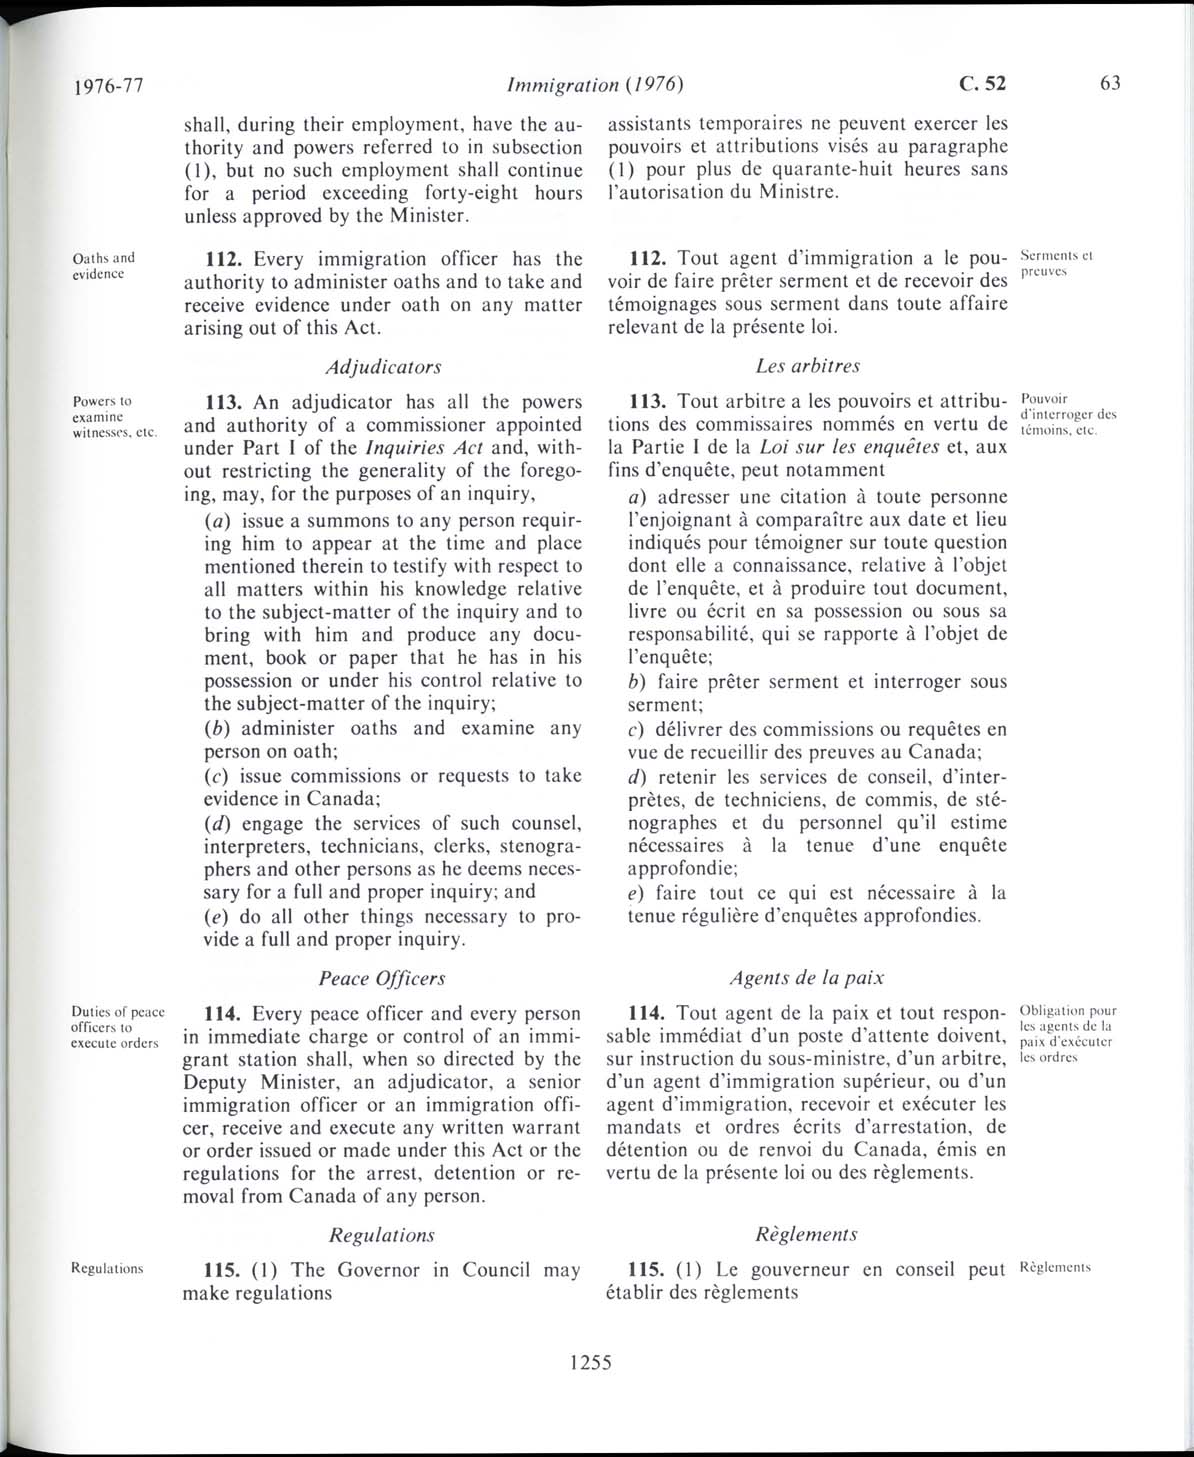 Page 1255 Immigration Act, 1976